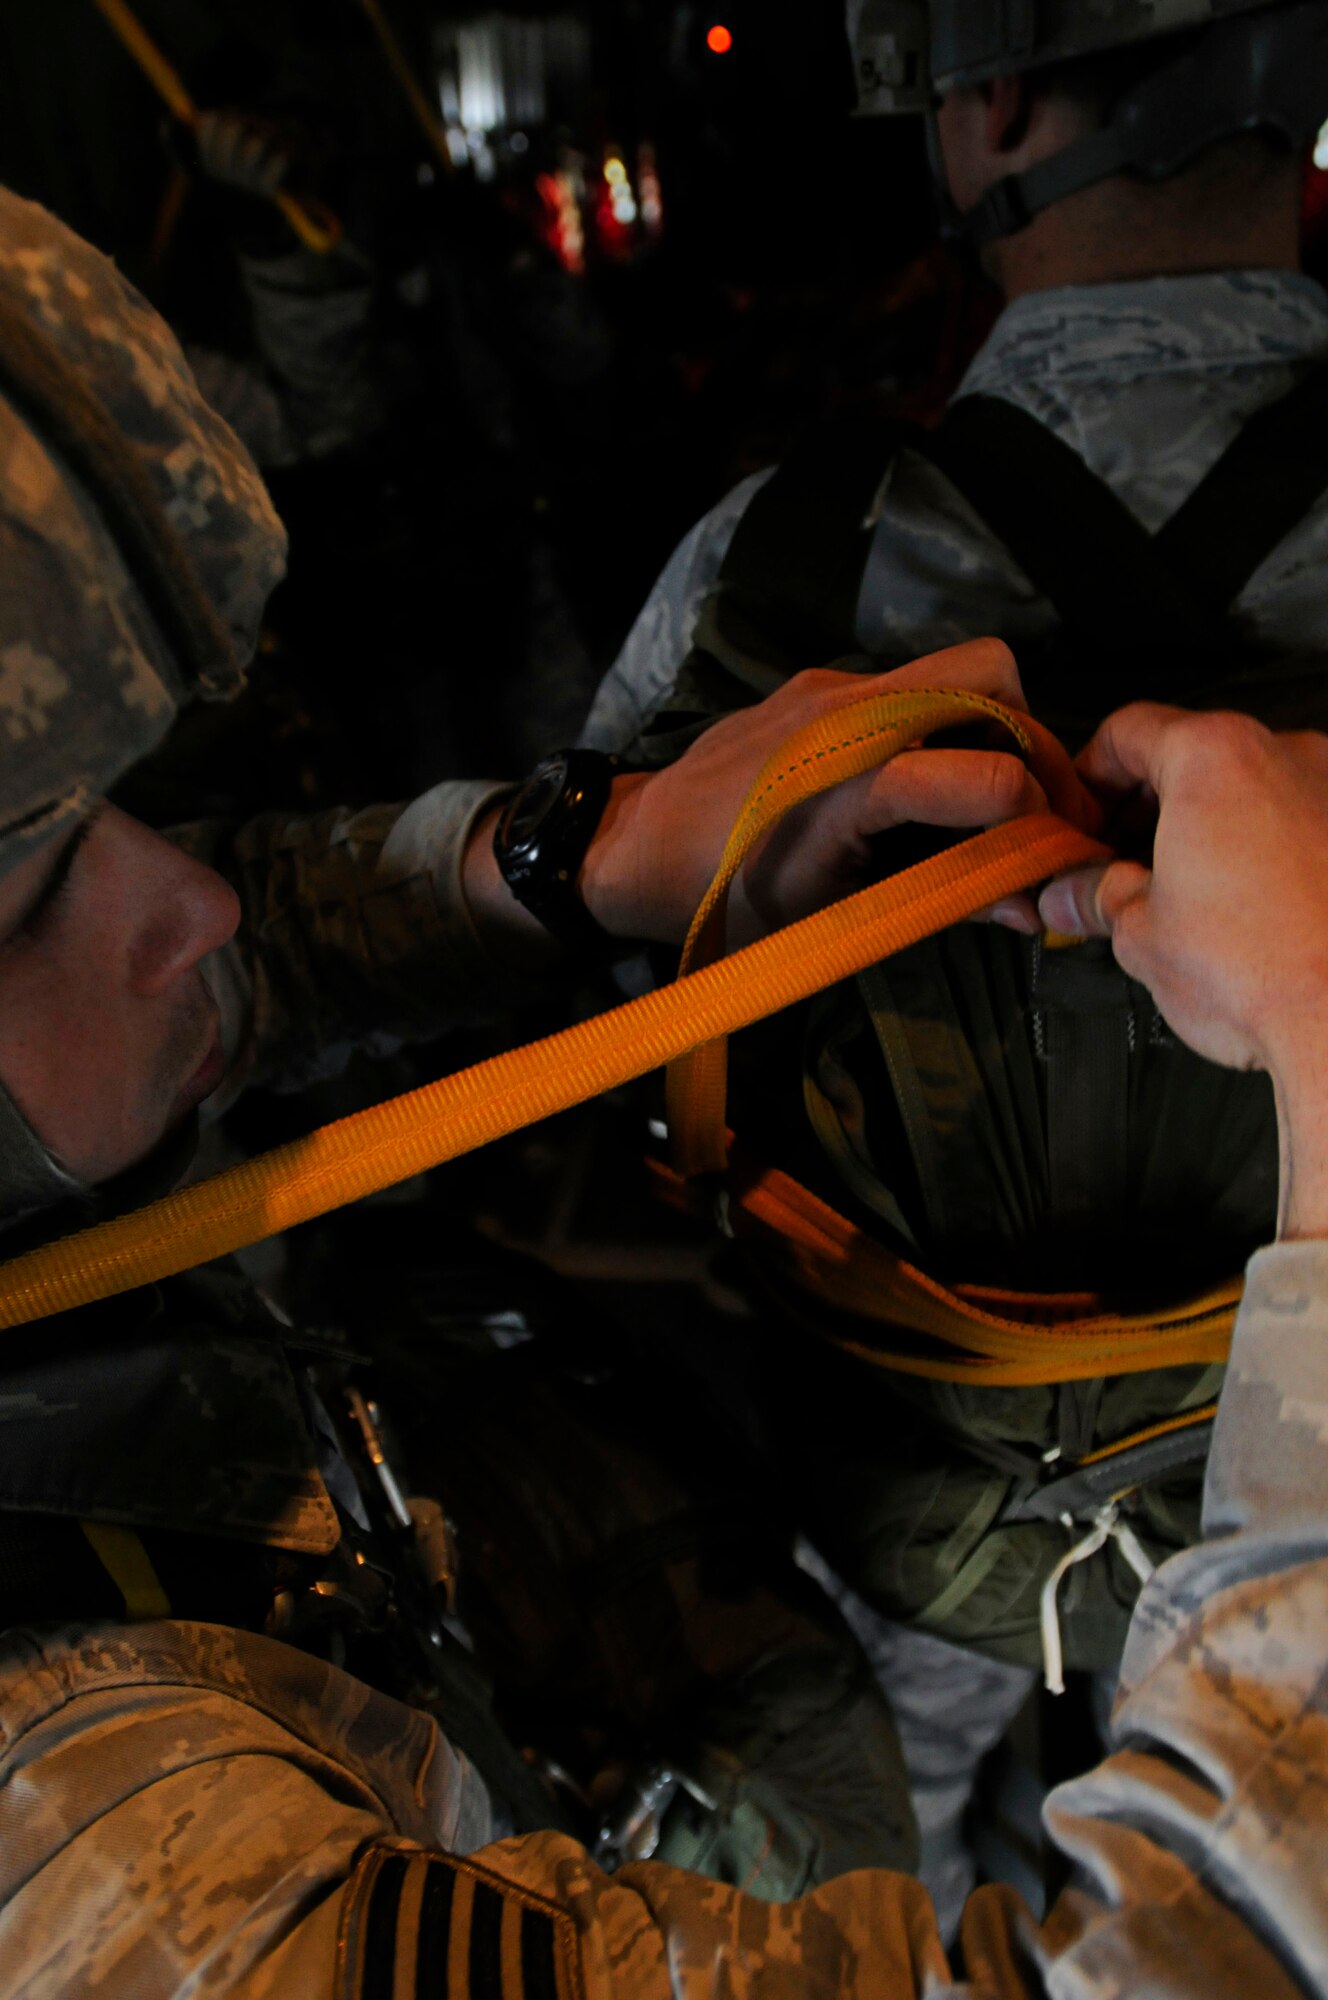 U.S. Air Force Staff Sgt. Joseph Klimaski, secures a static line to Staff Sgt. Nickolas Hurst's parachute, both from the 435th Security Forces Squadron, during Thracian Spring 2011, Plovdiv, Bulgaria, April 29, 2011. Thracian Spring 2011 is a two week on-site training designed to build partnerships between the U.S. and Bulgarian Air Force. (U.S. Air Force photo by Airman 1st Class Desiree W. Esposito)